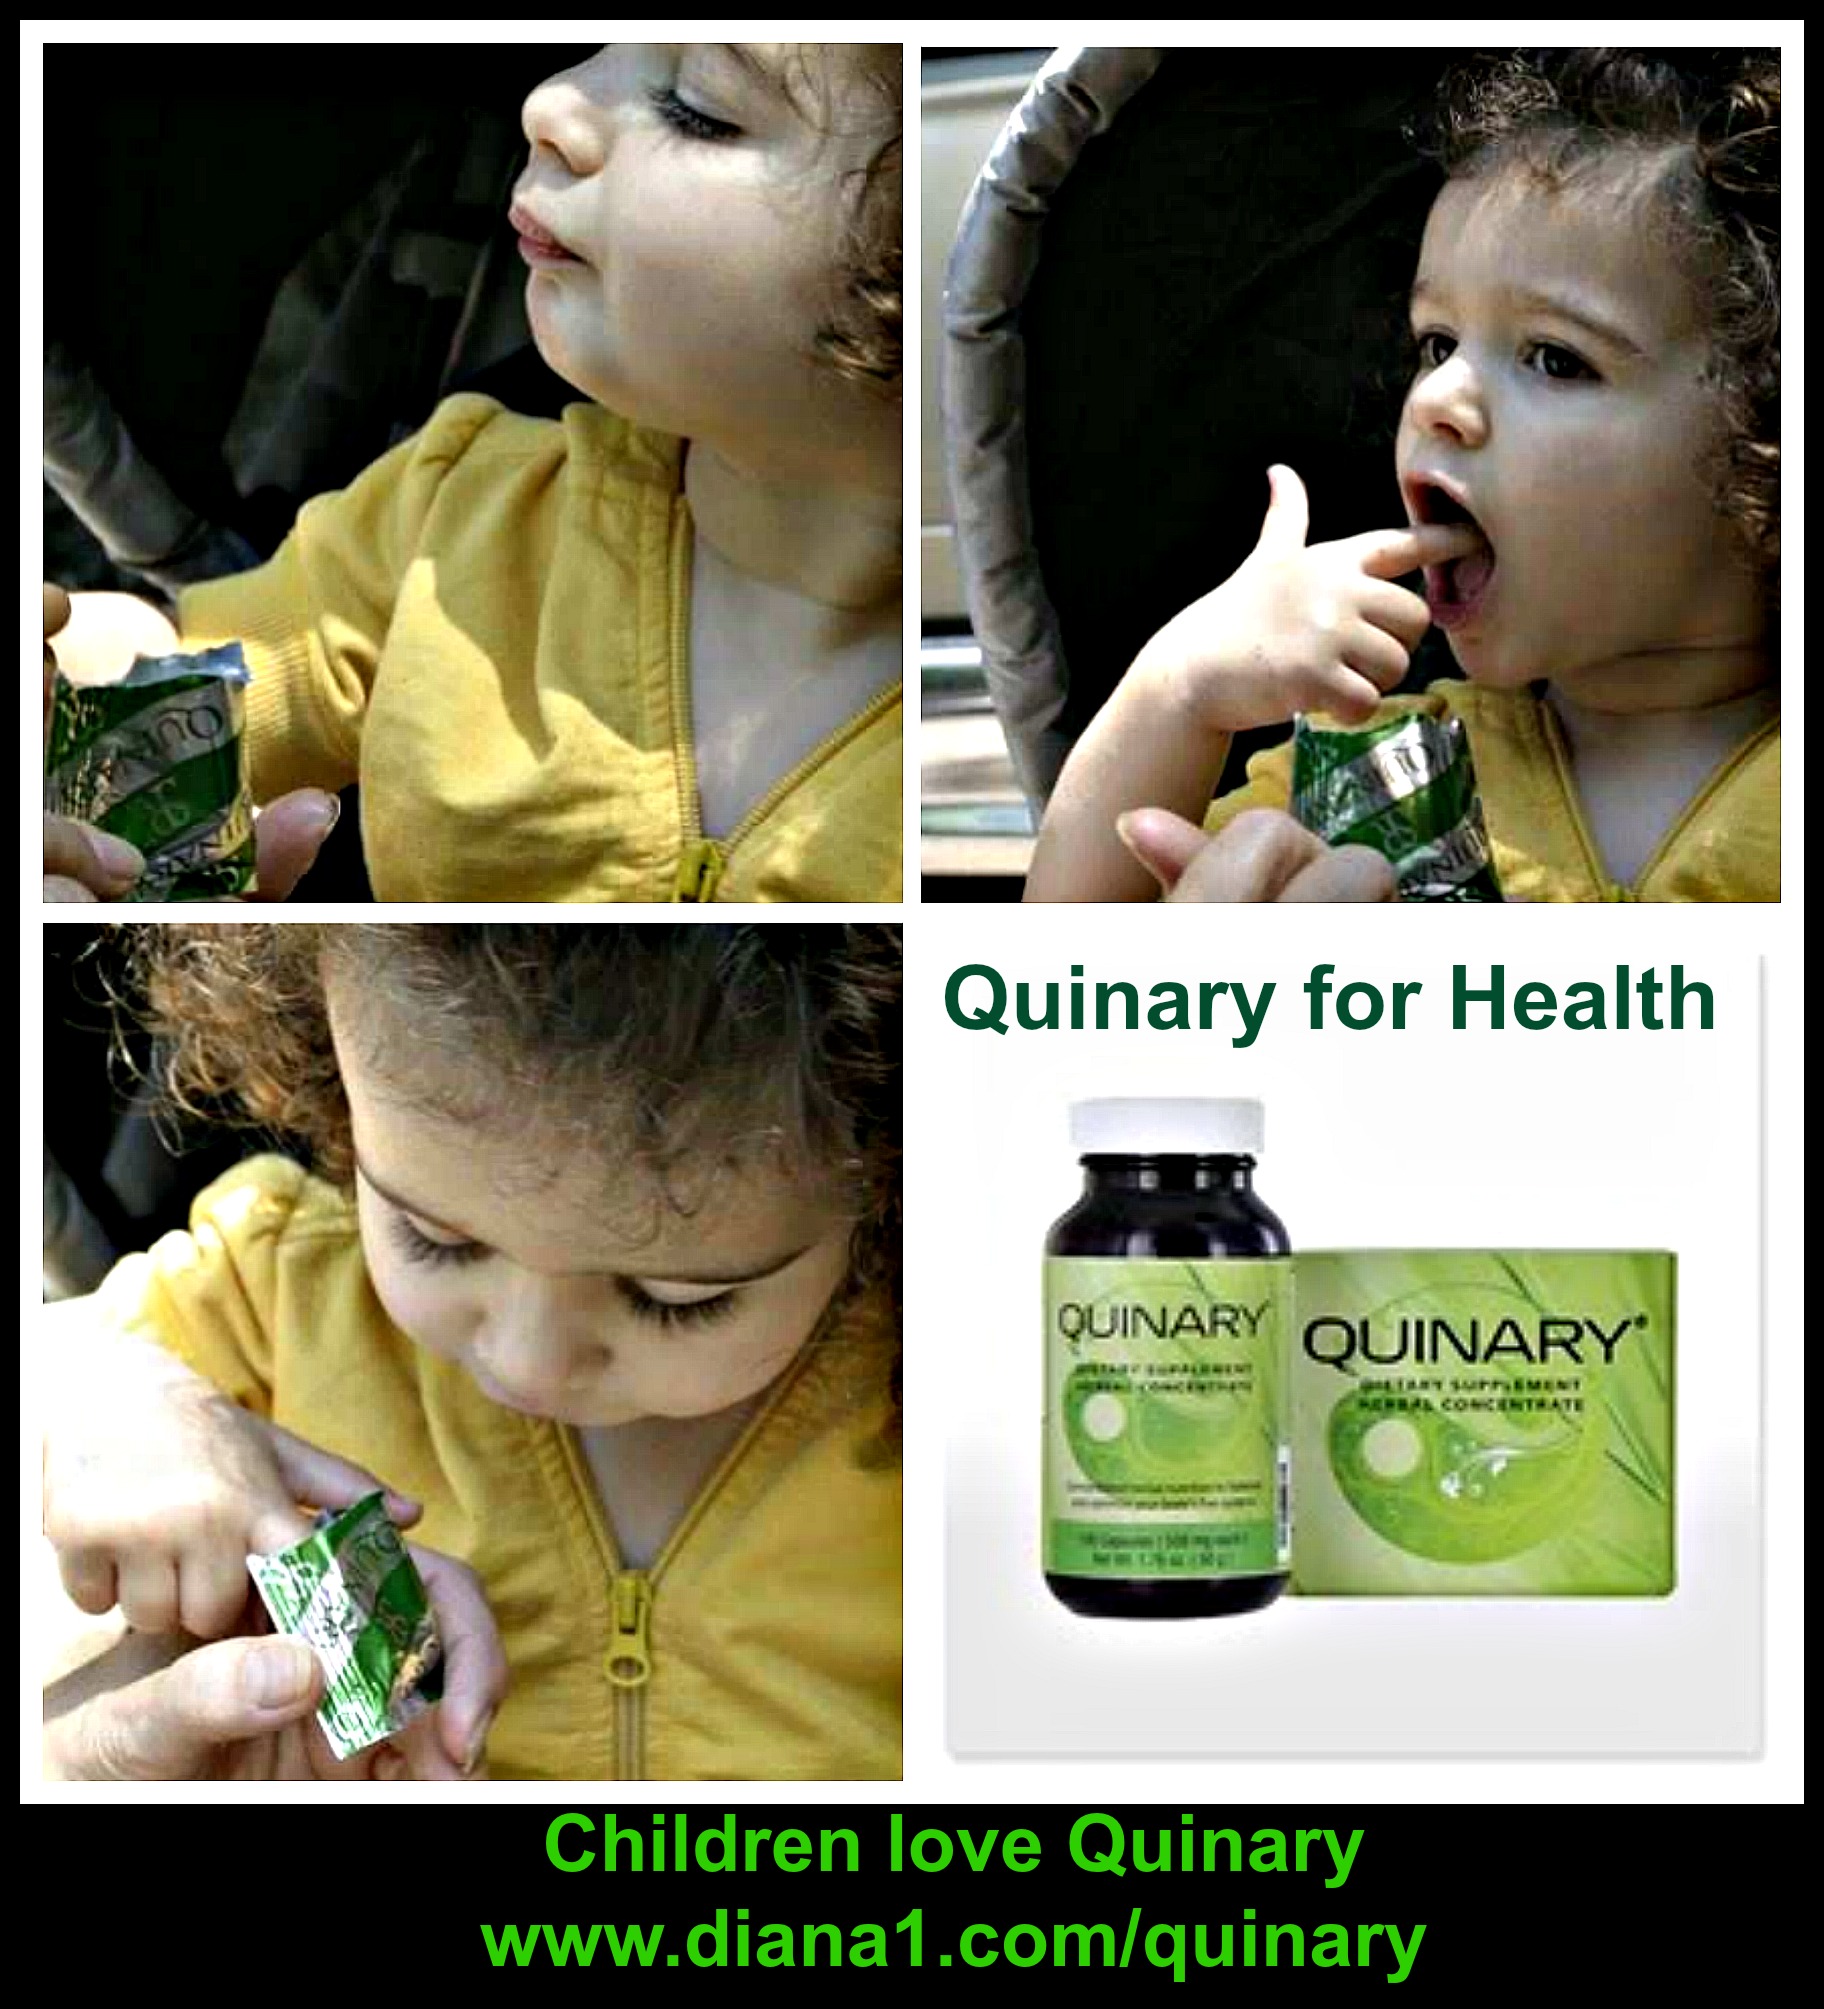 Children Love Quinary Sunrider Chinese Herbs Www Diana1 Comquinary